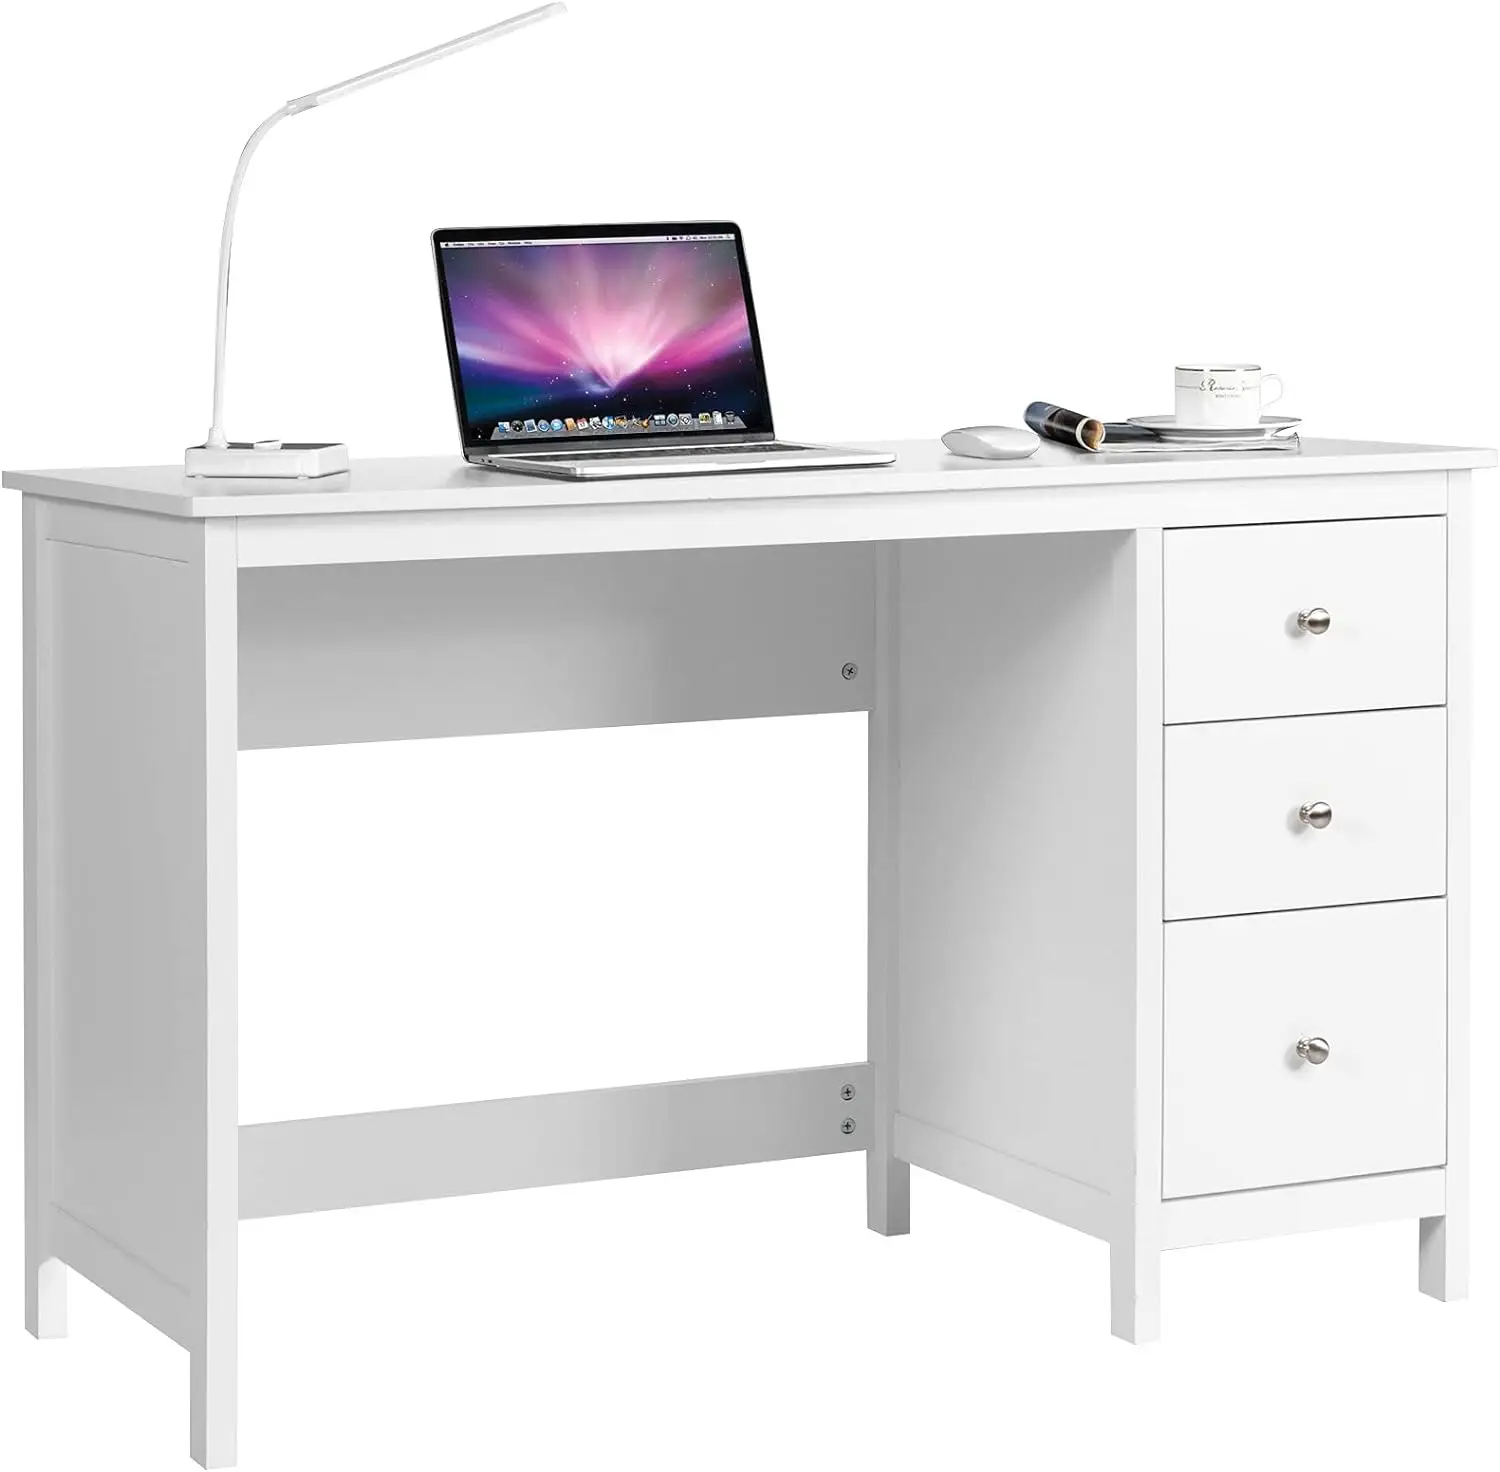 Tangkula White Desk with Drawers, Modern Home Office Computer Desk with Storage Drawers & Spacious Desktop, Compact Writing